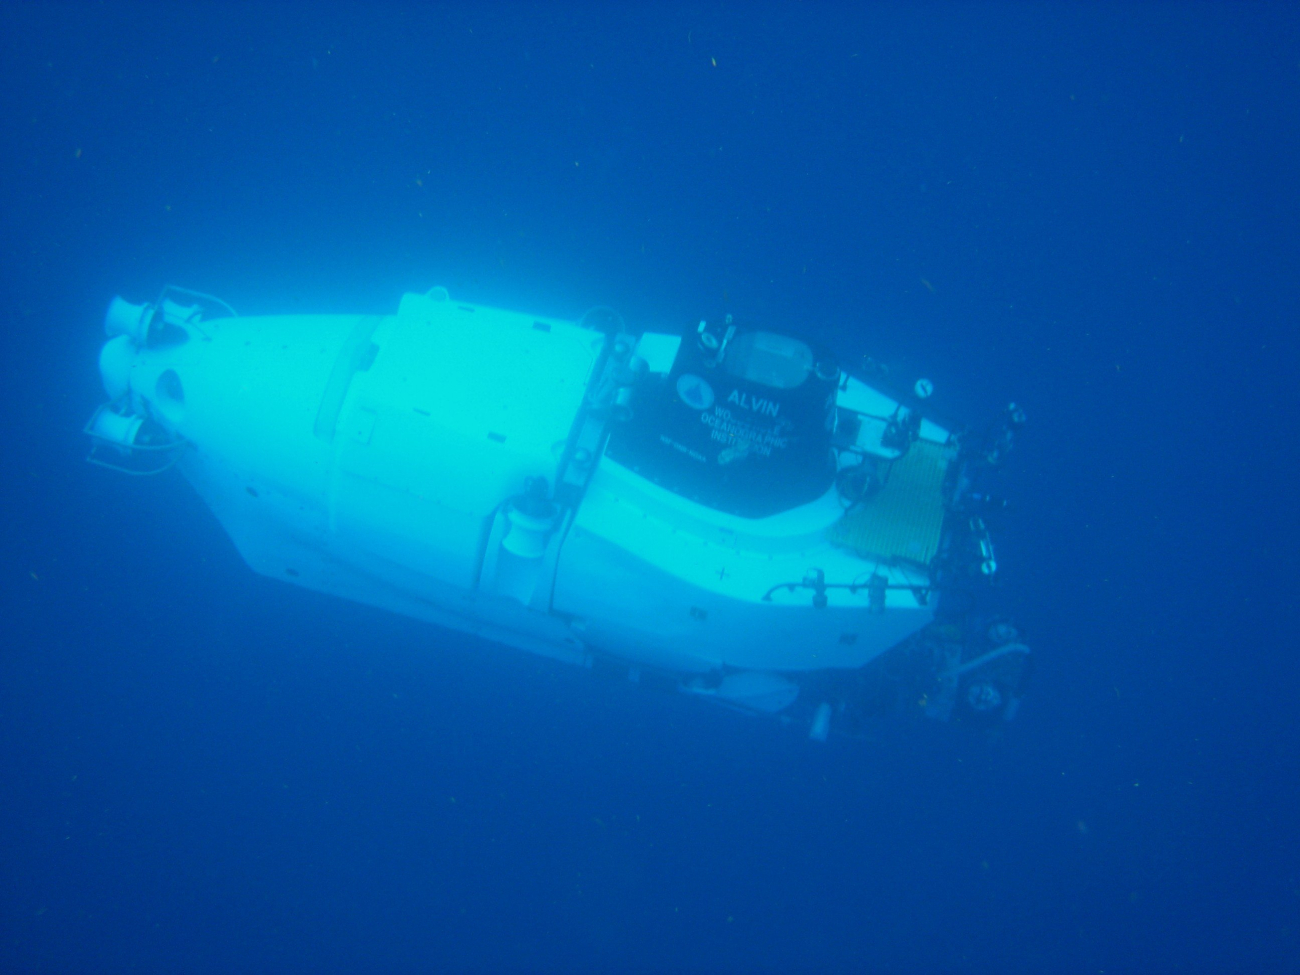 The ALVIN submersible begins its descent to the bottom